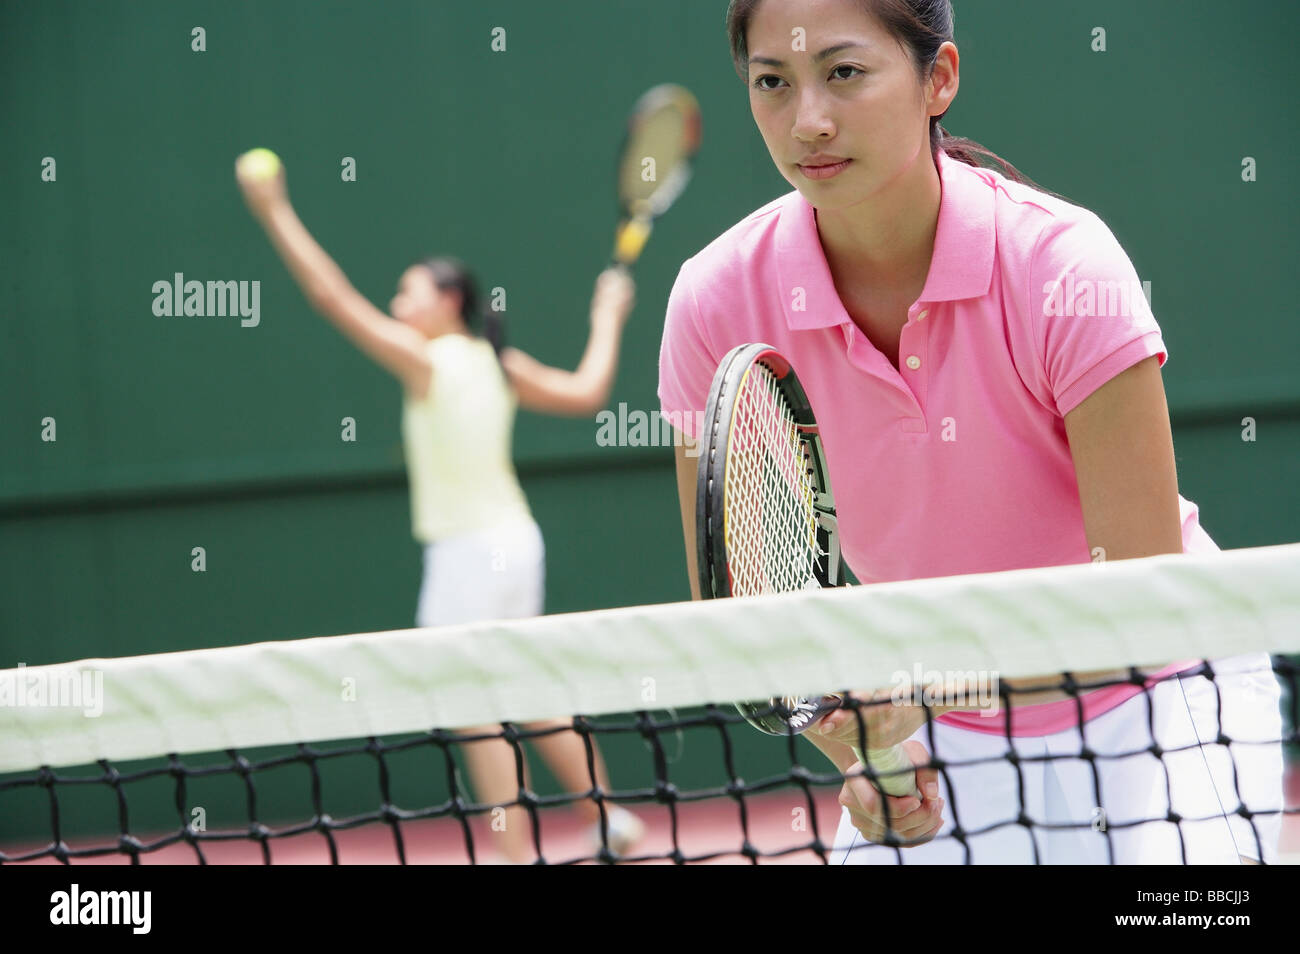 Women with tennis rackets, playing tennis Stock Photo